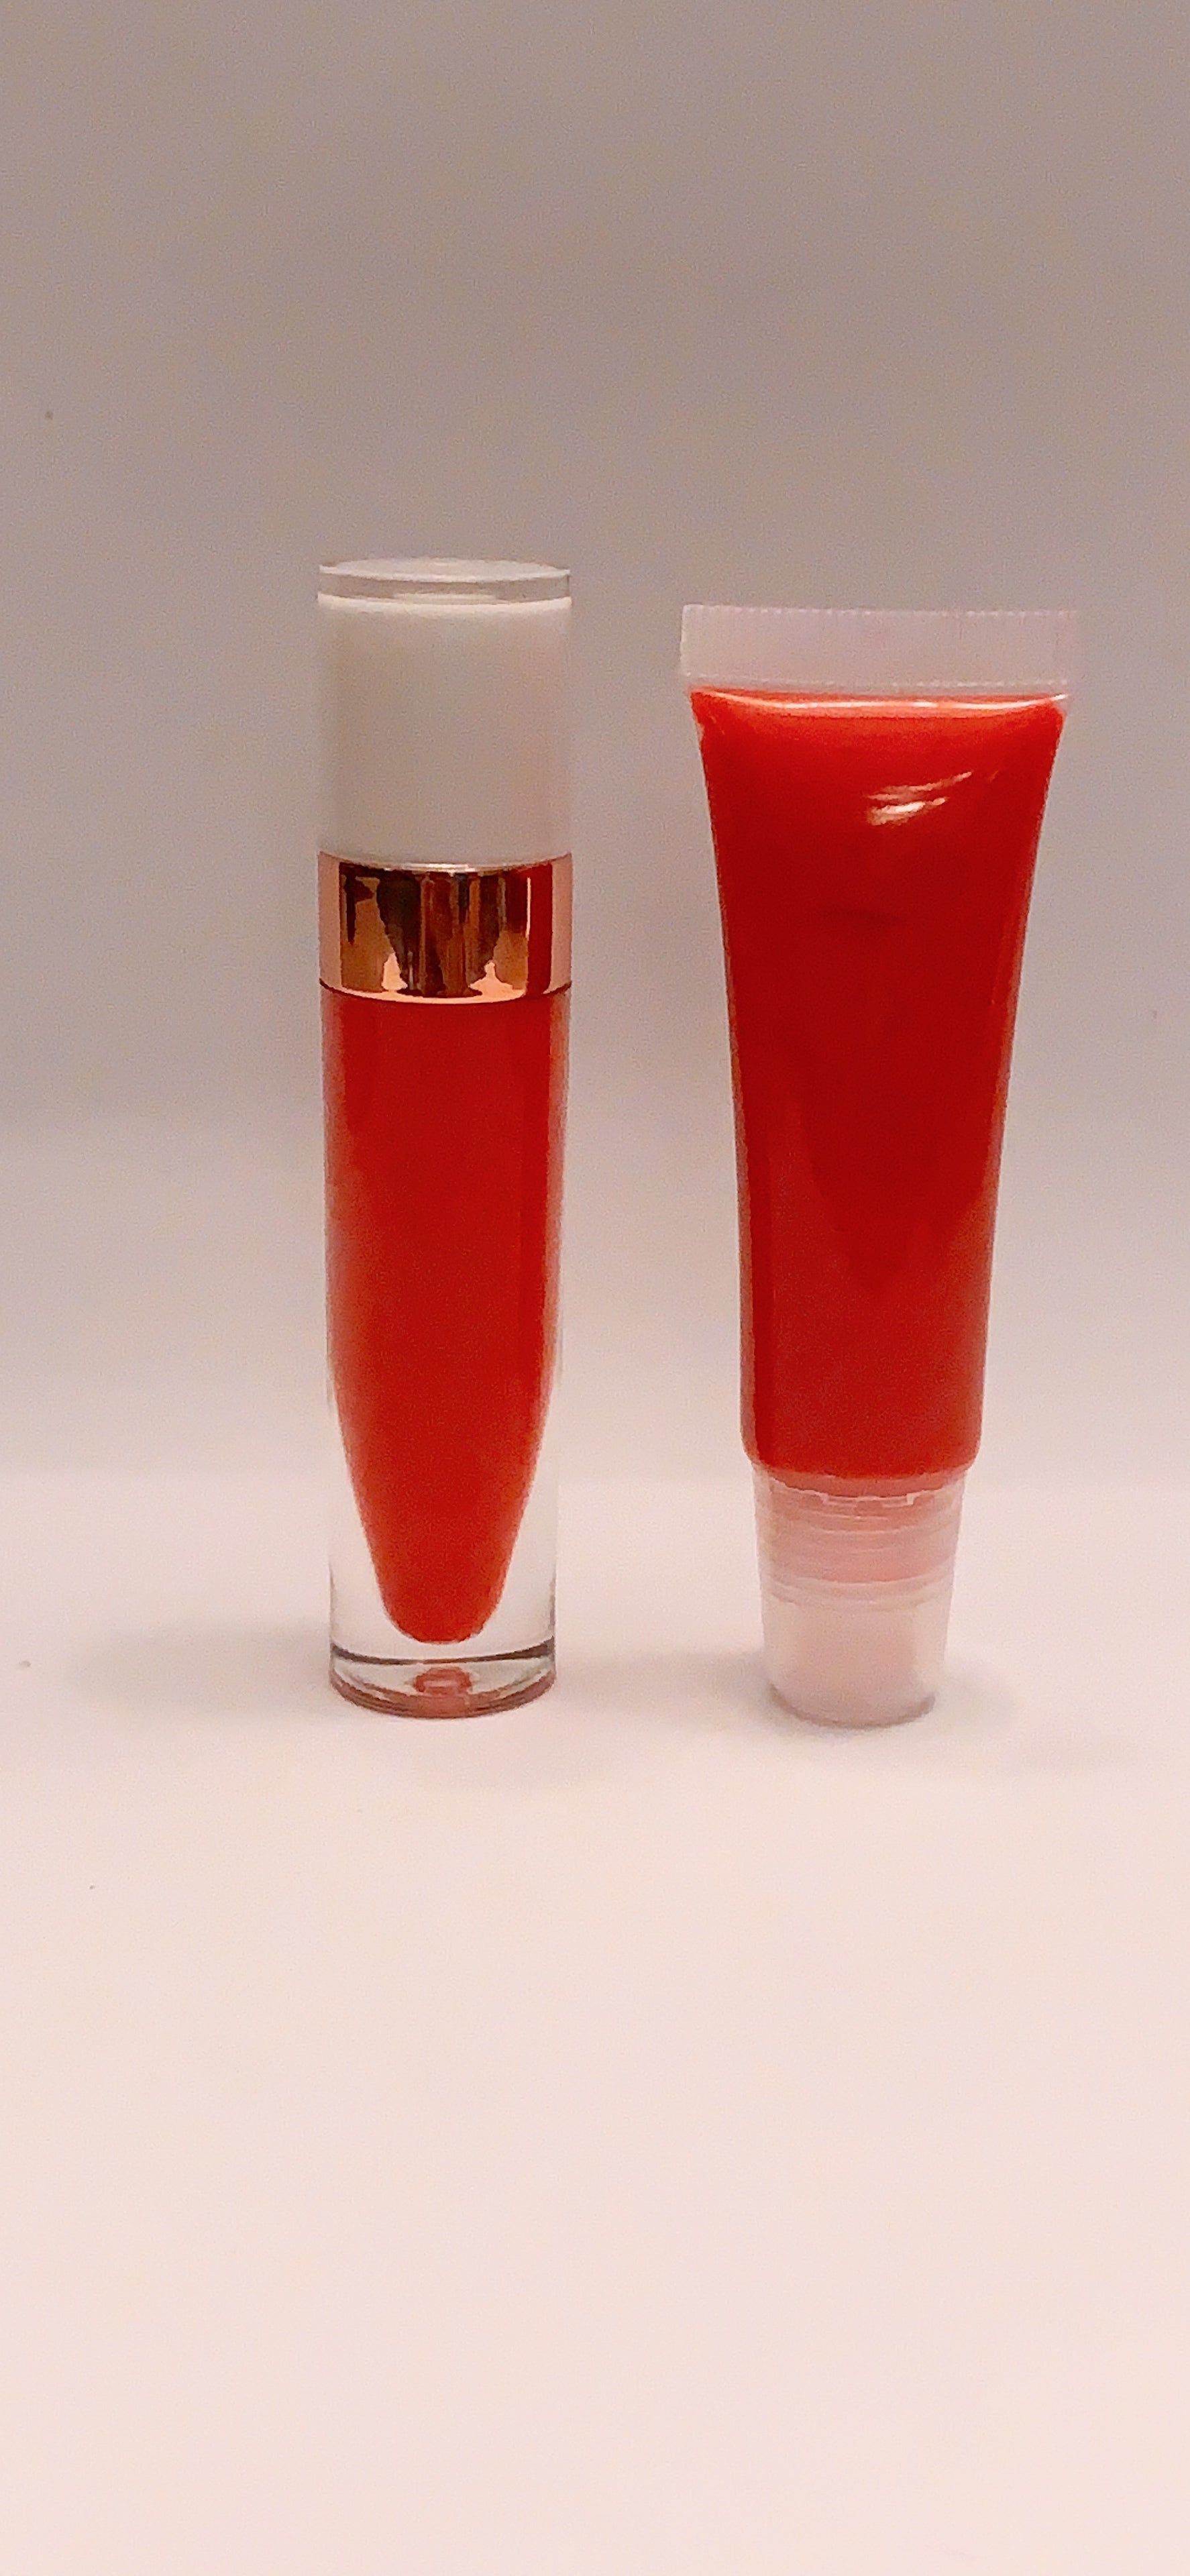 IgniTed Lips by Signature K - Matte Lip Color & Lip Gloss Sets